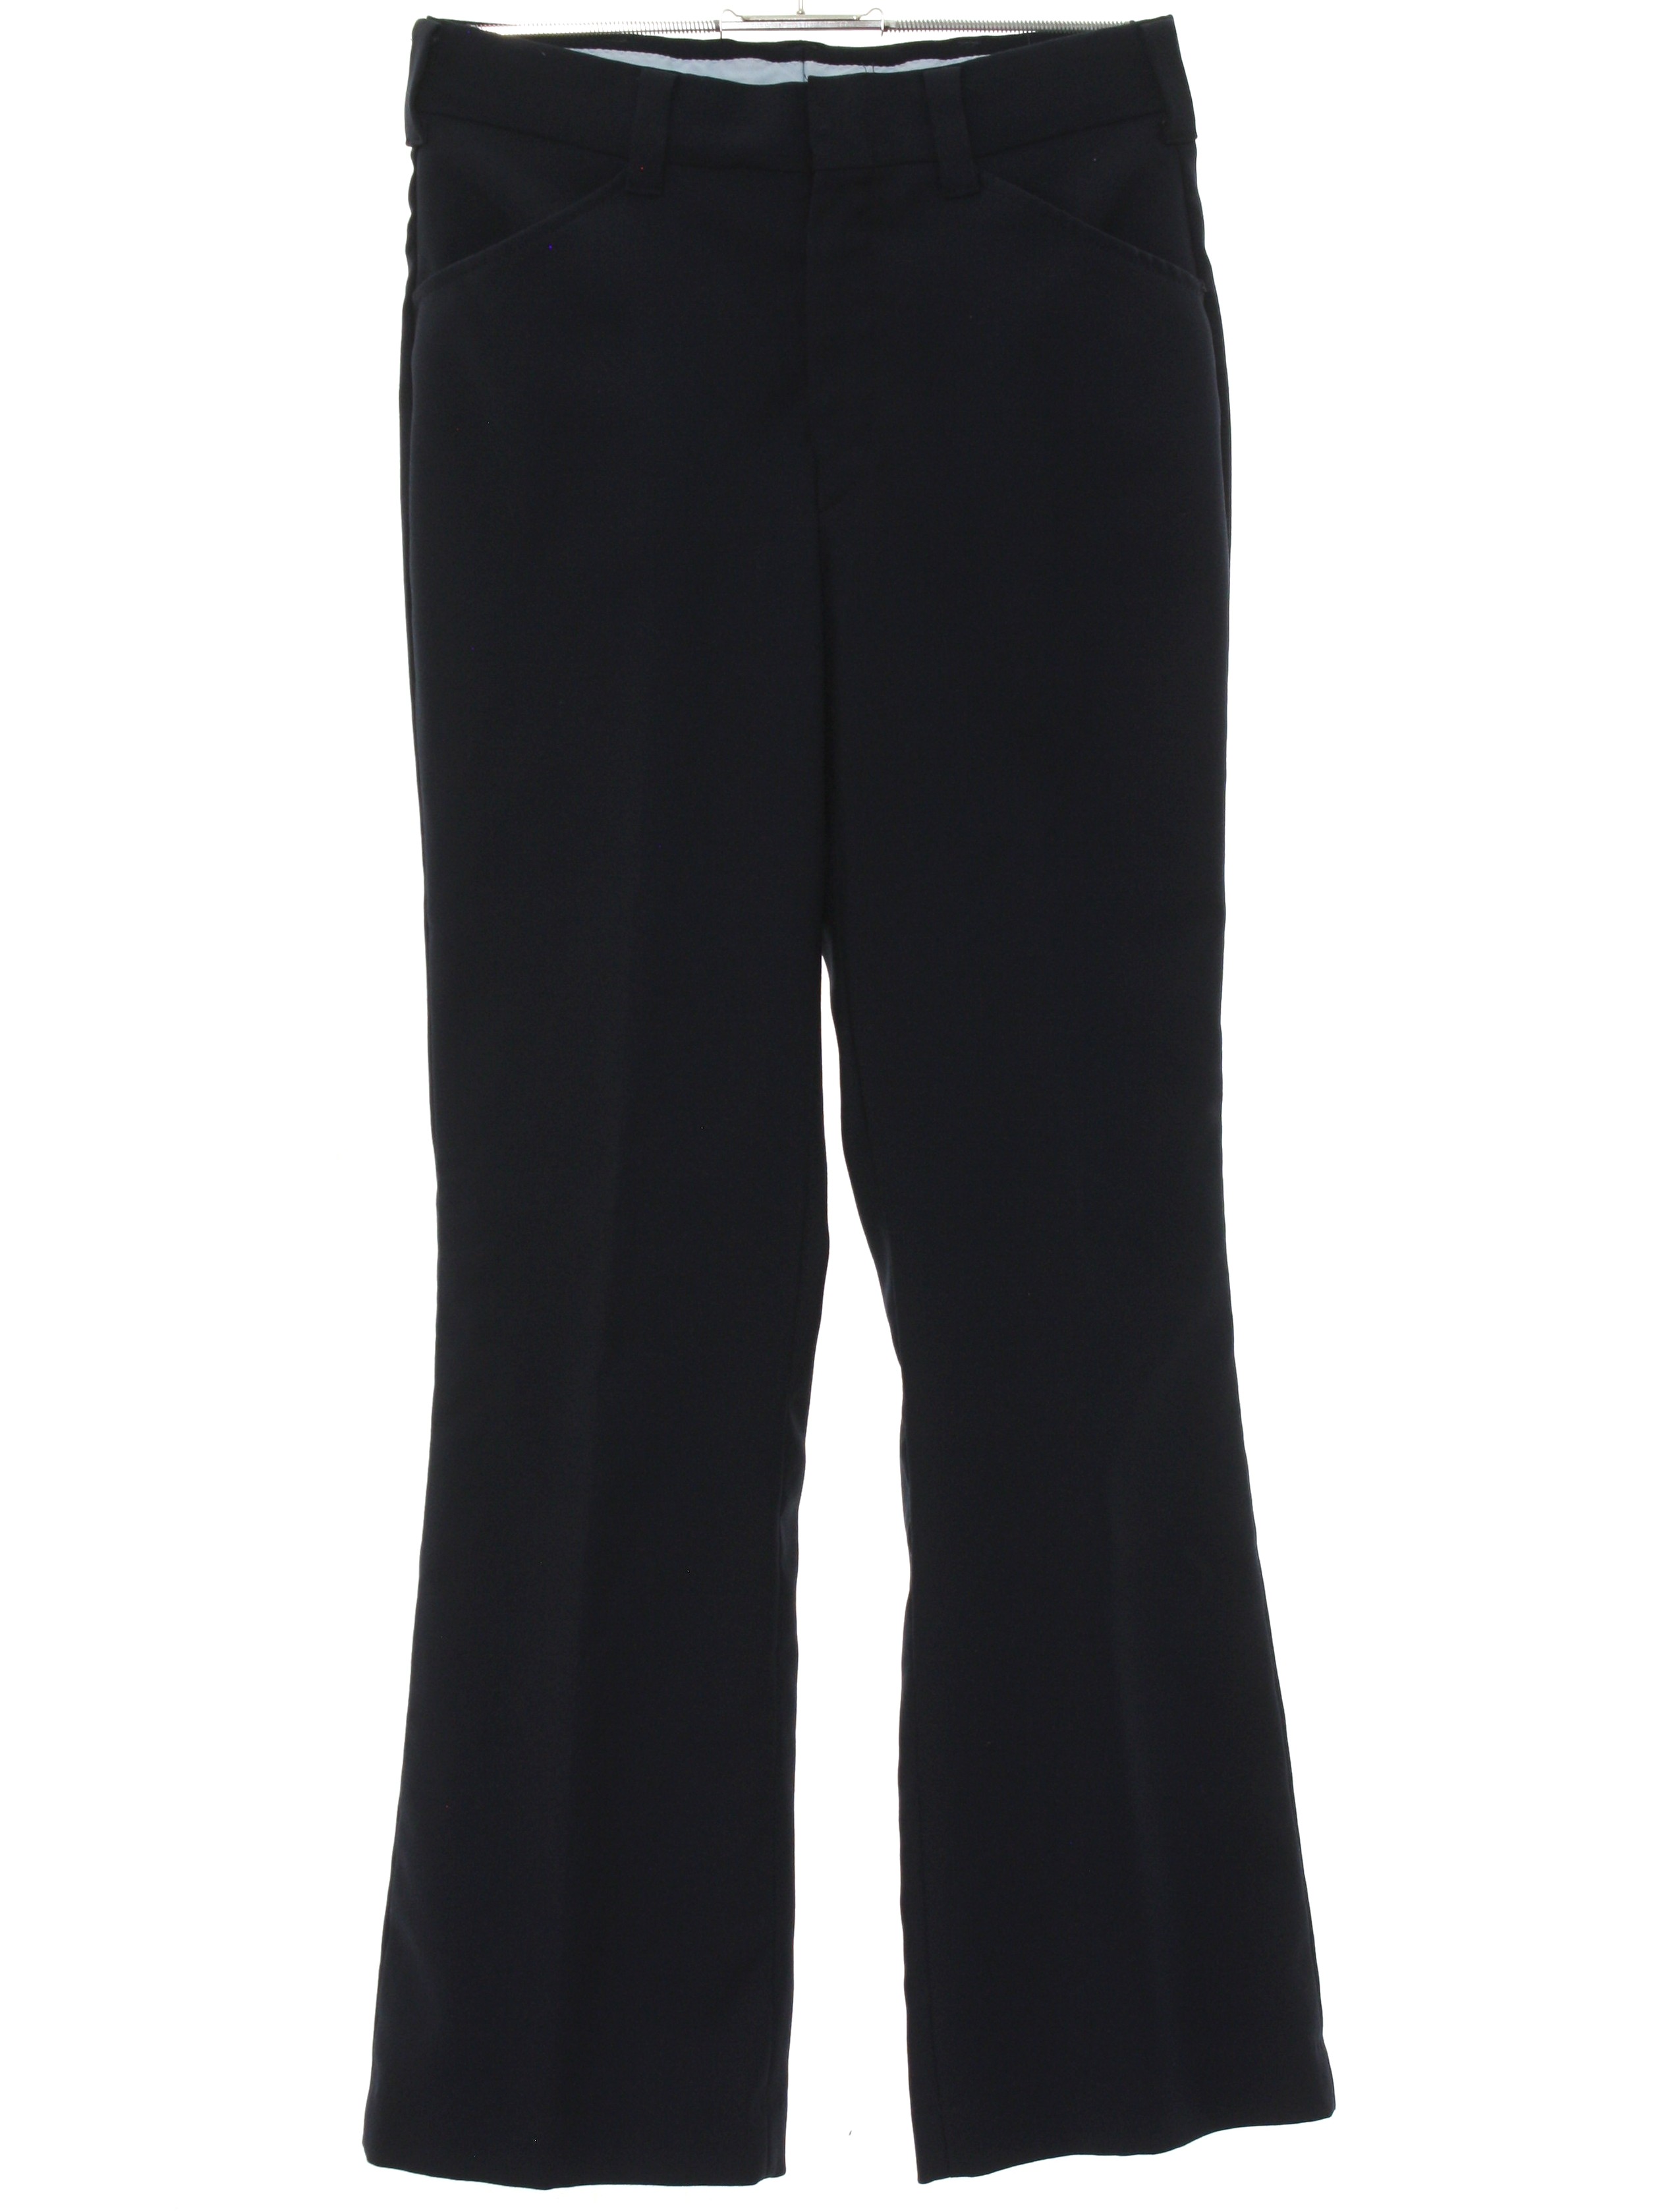 70s Retro Flared Pants / Flares: 70s -J C Penney- Mens navy blue ...